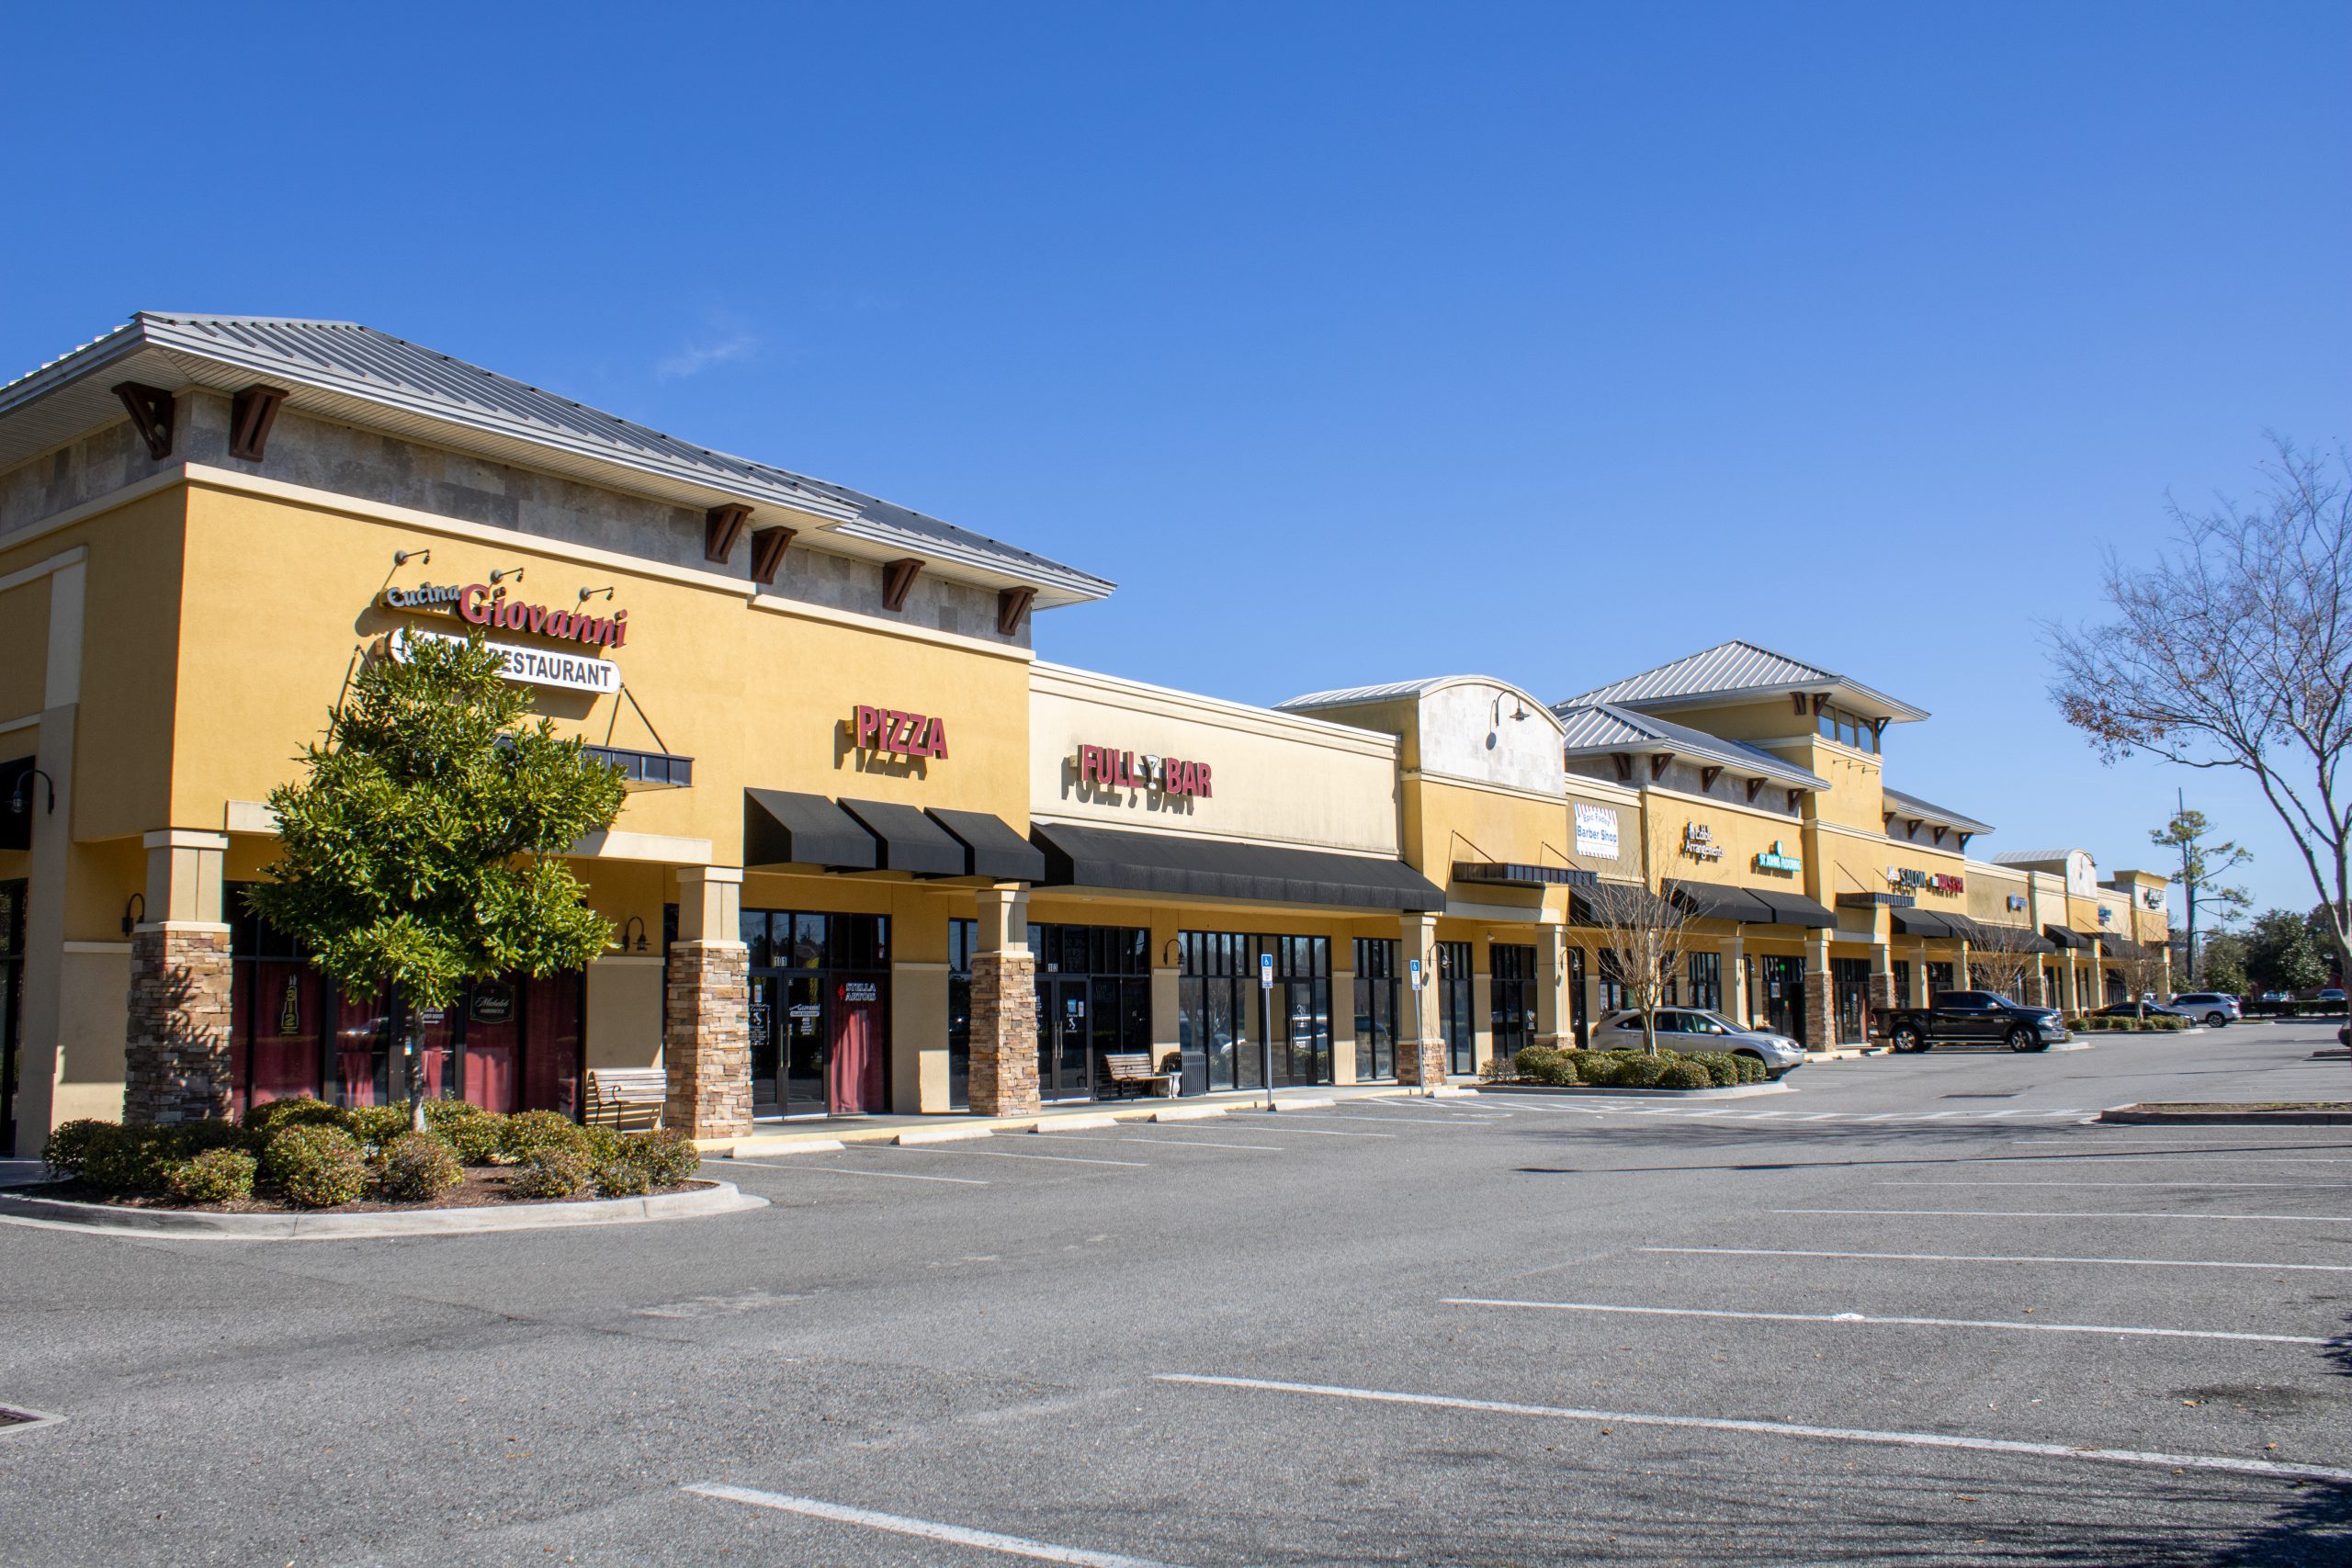 A one-story retail center.